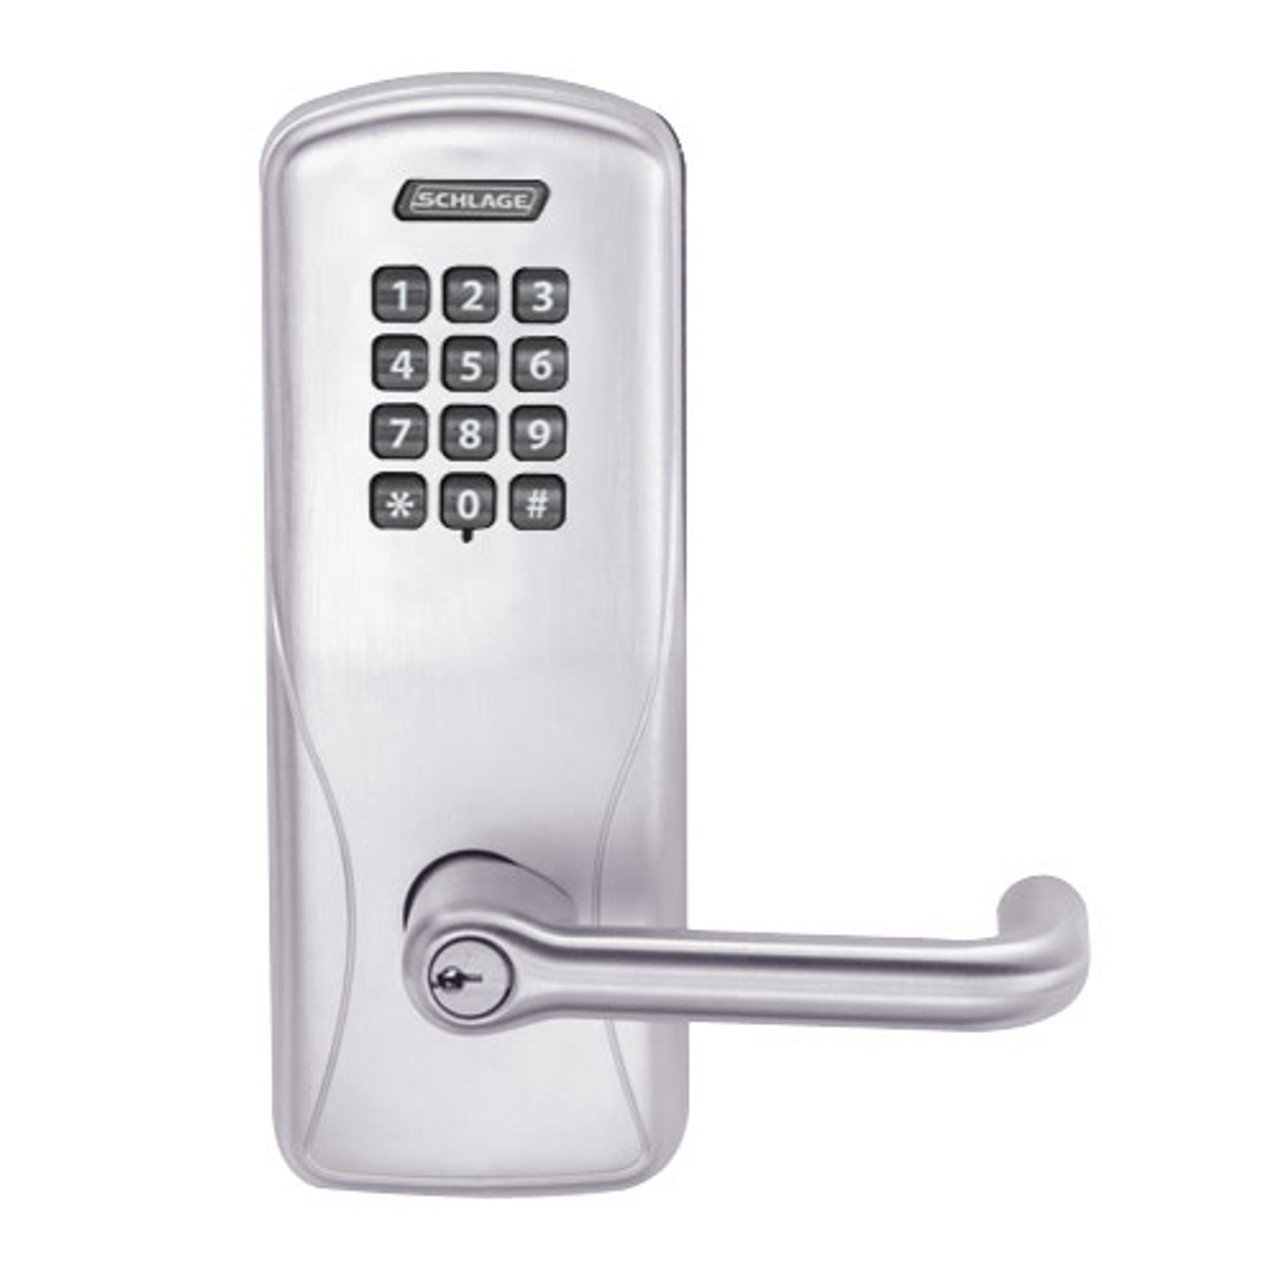 CO200-CY-50-KP-TLR-PD-626 Schlage Standalone Cylindrical Electronic Keypad locks in Satin Chrome